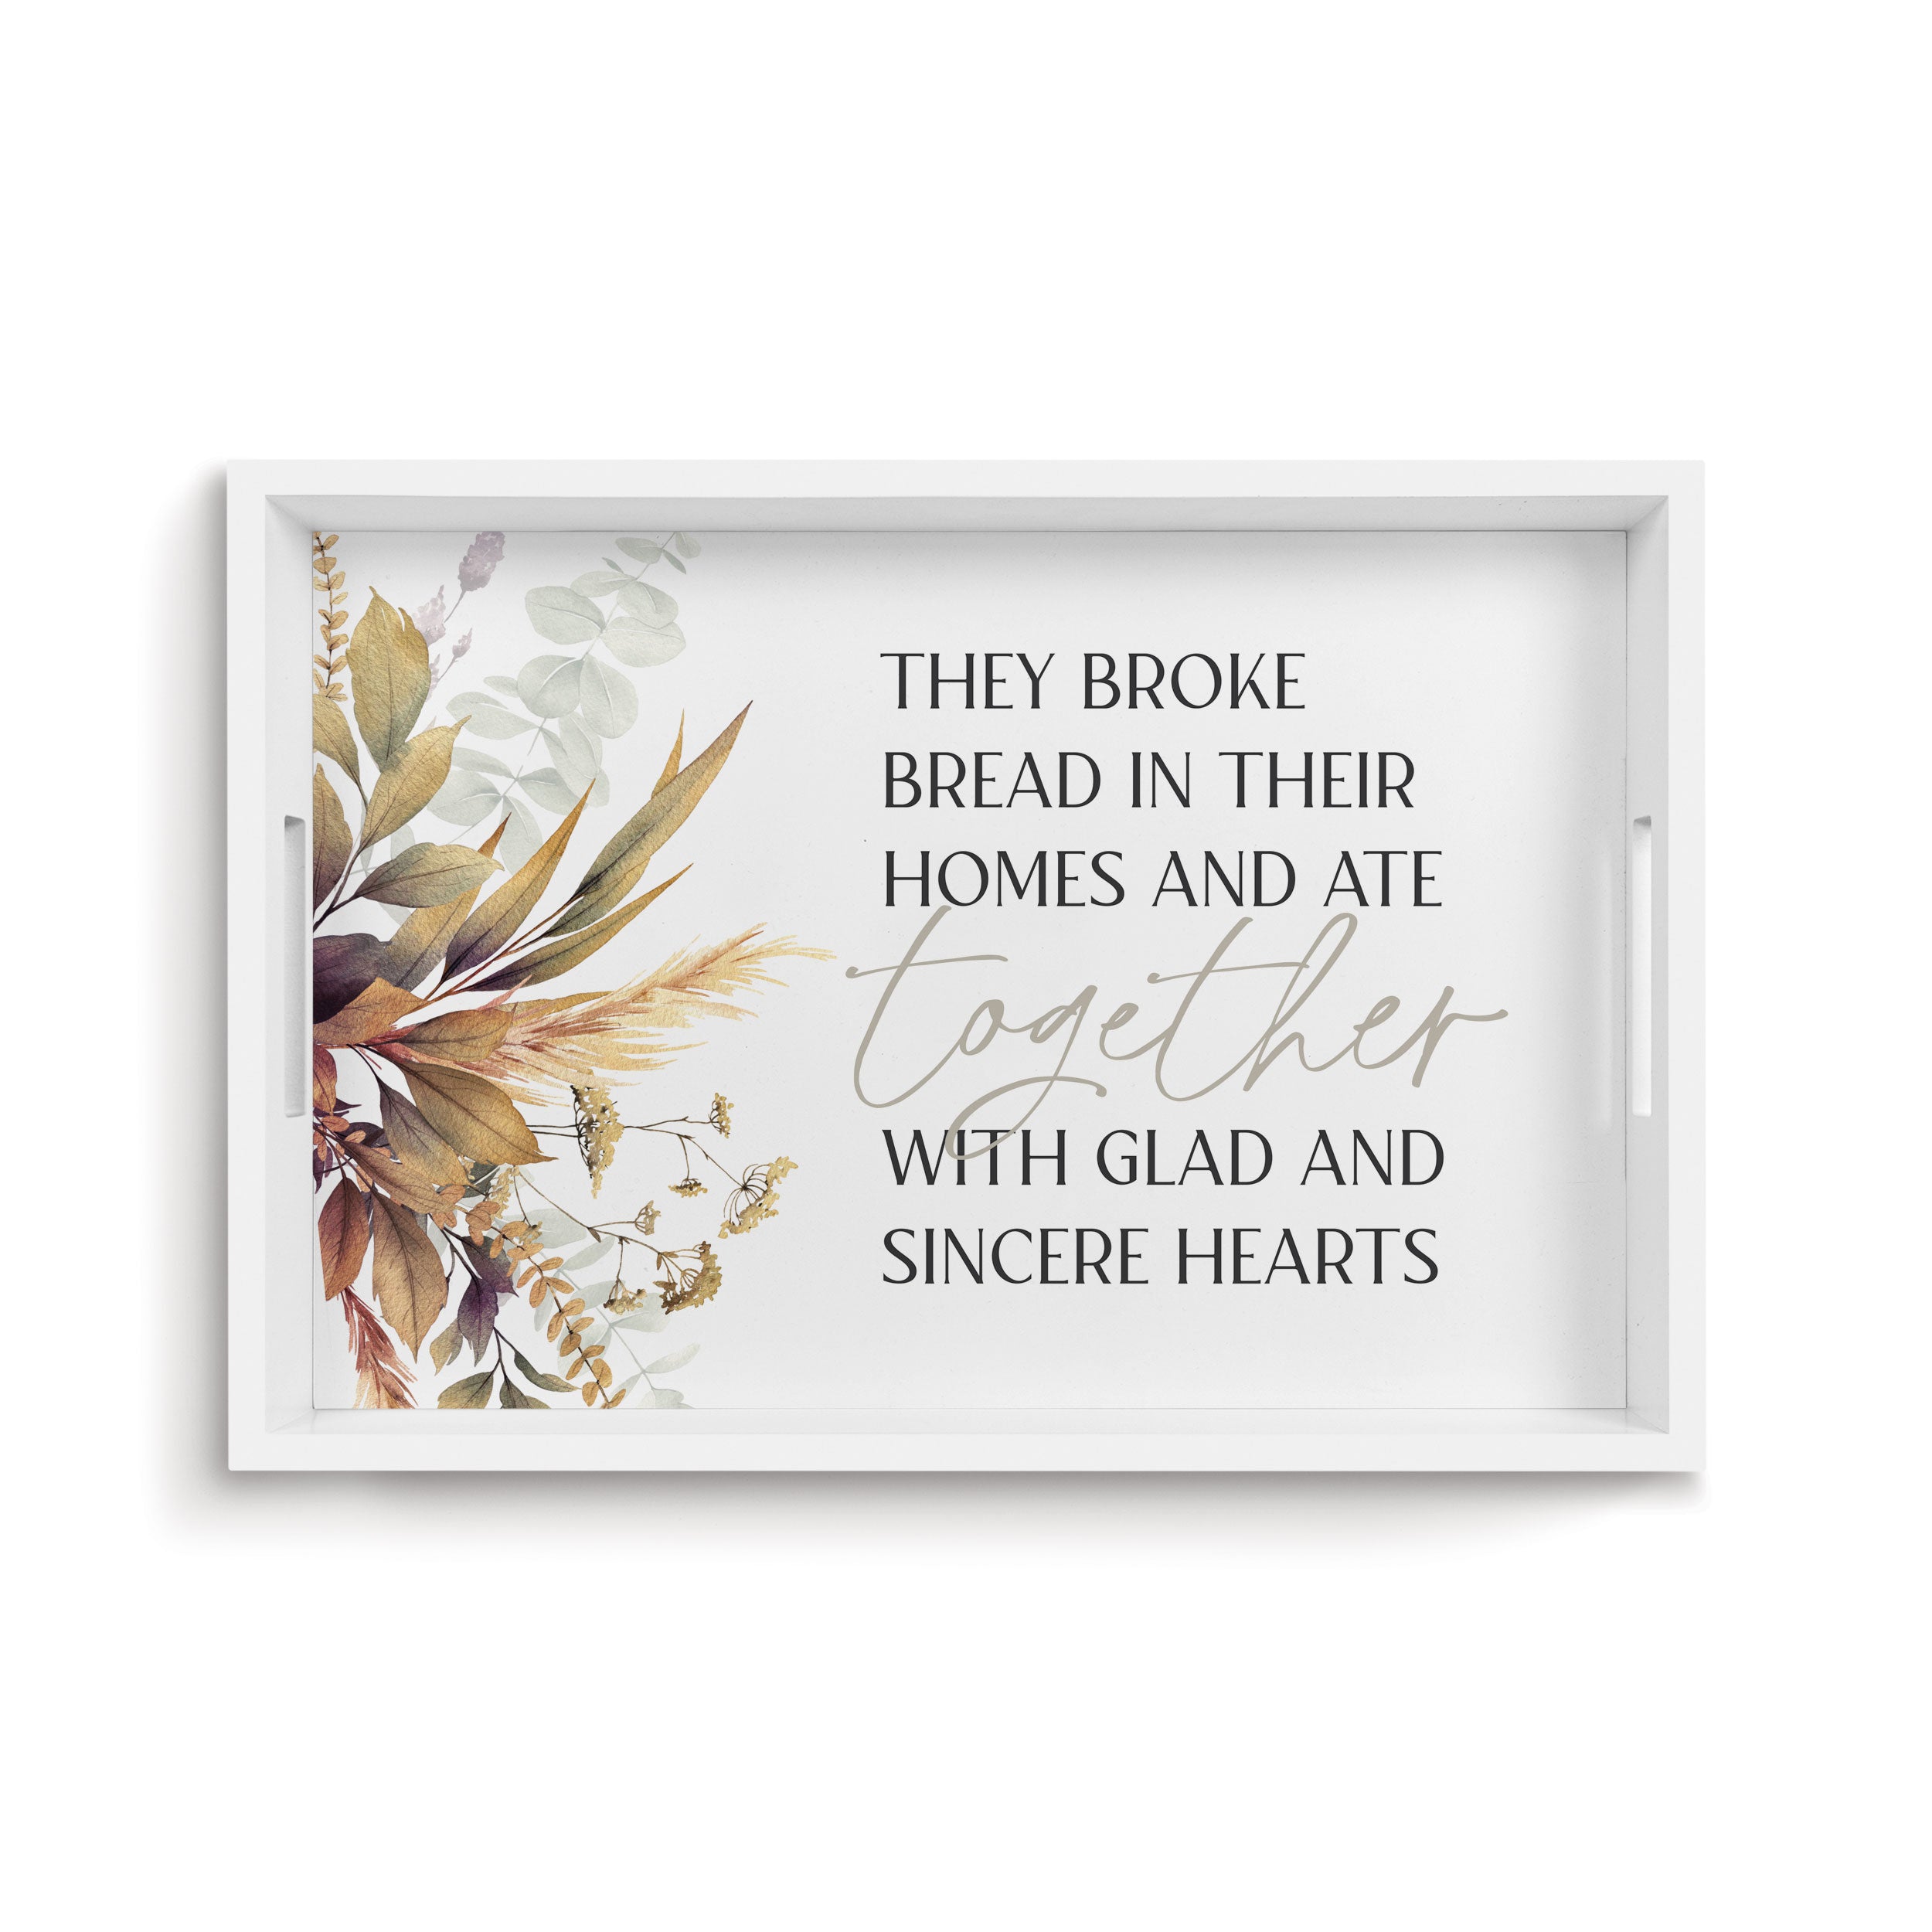 **They Broke Bread In Their Homes And Ate Together With Glad And Sincere Hearts Decorative Serving Tray